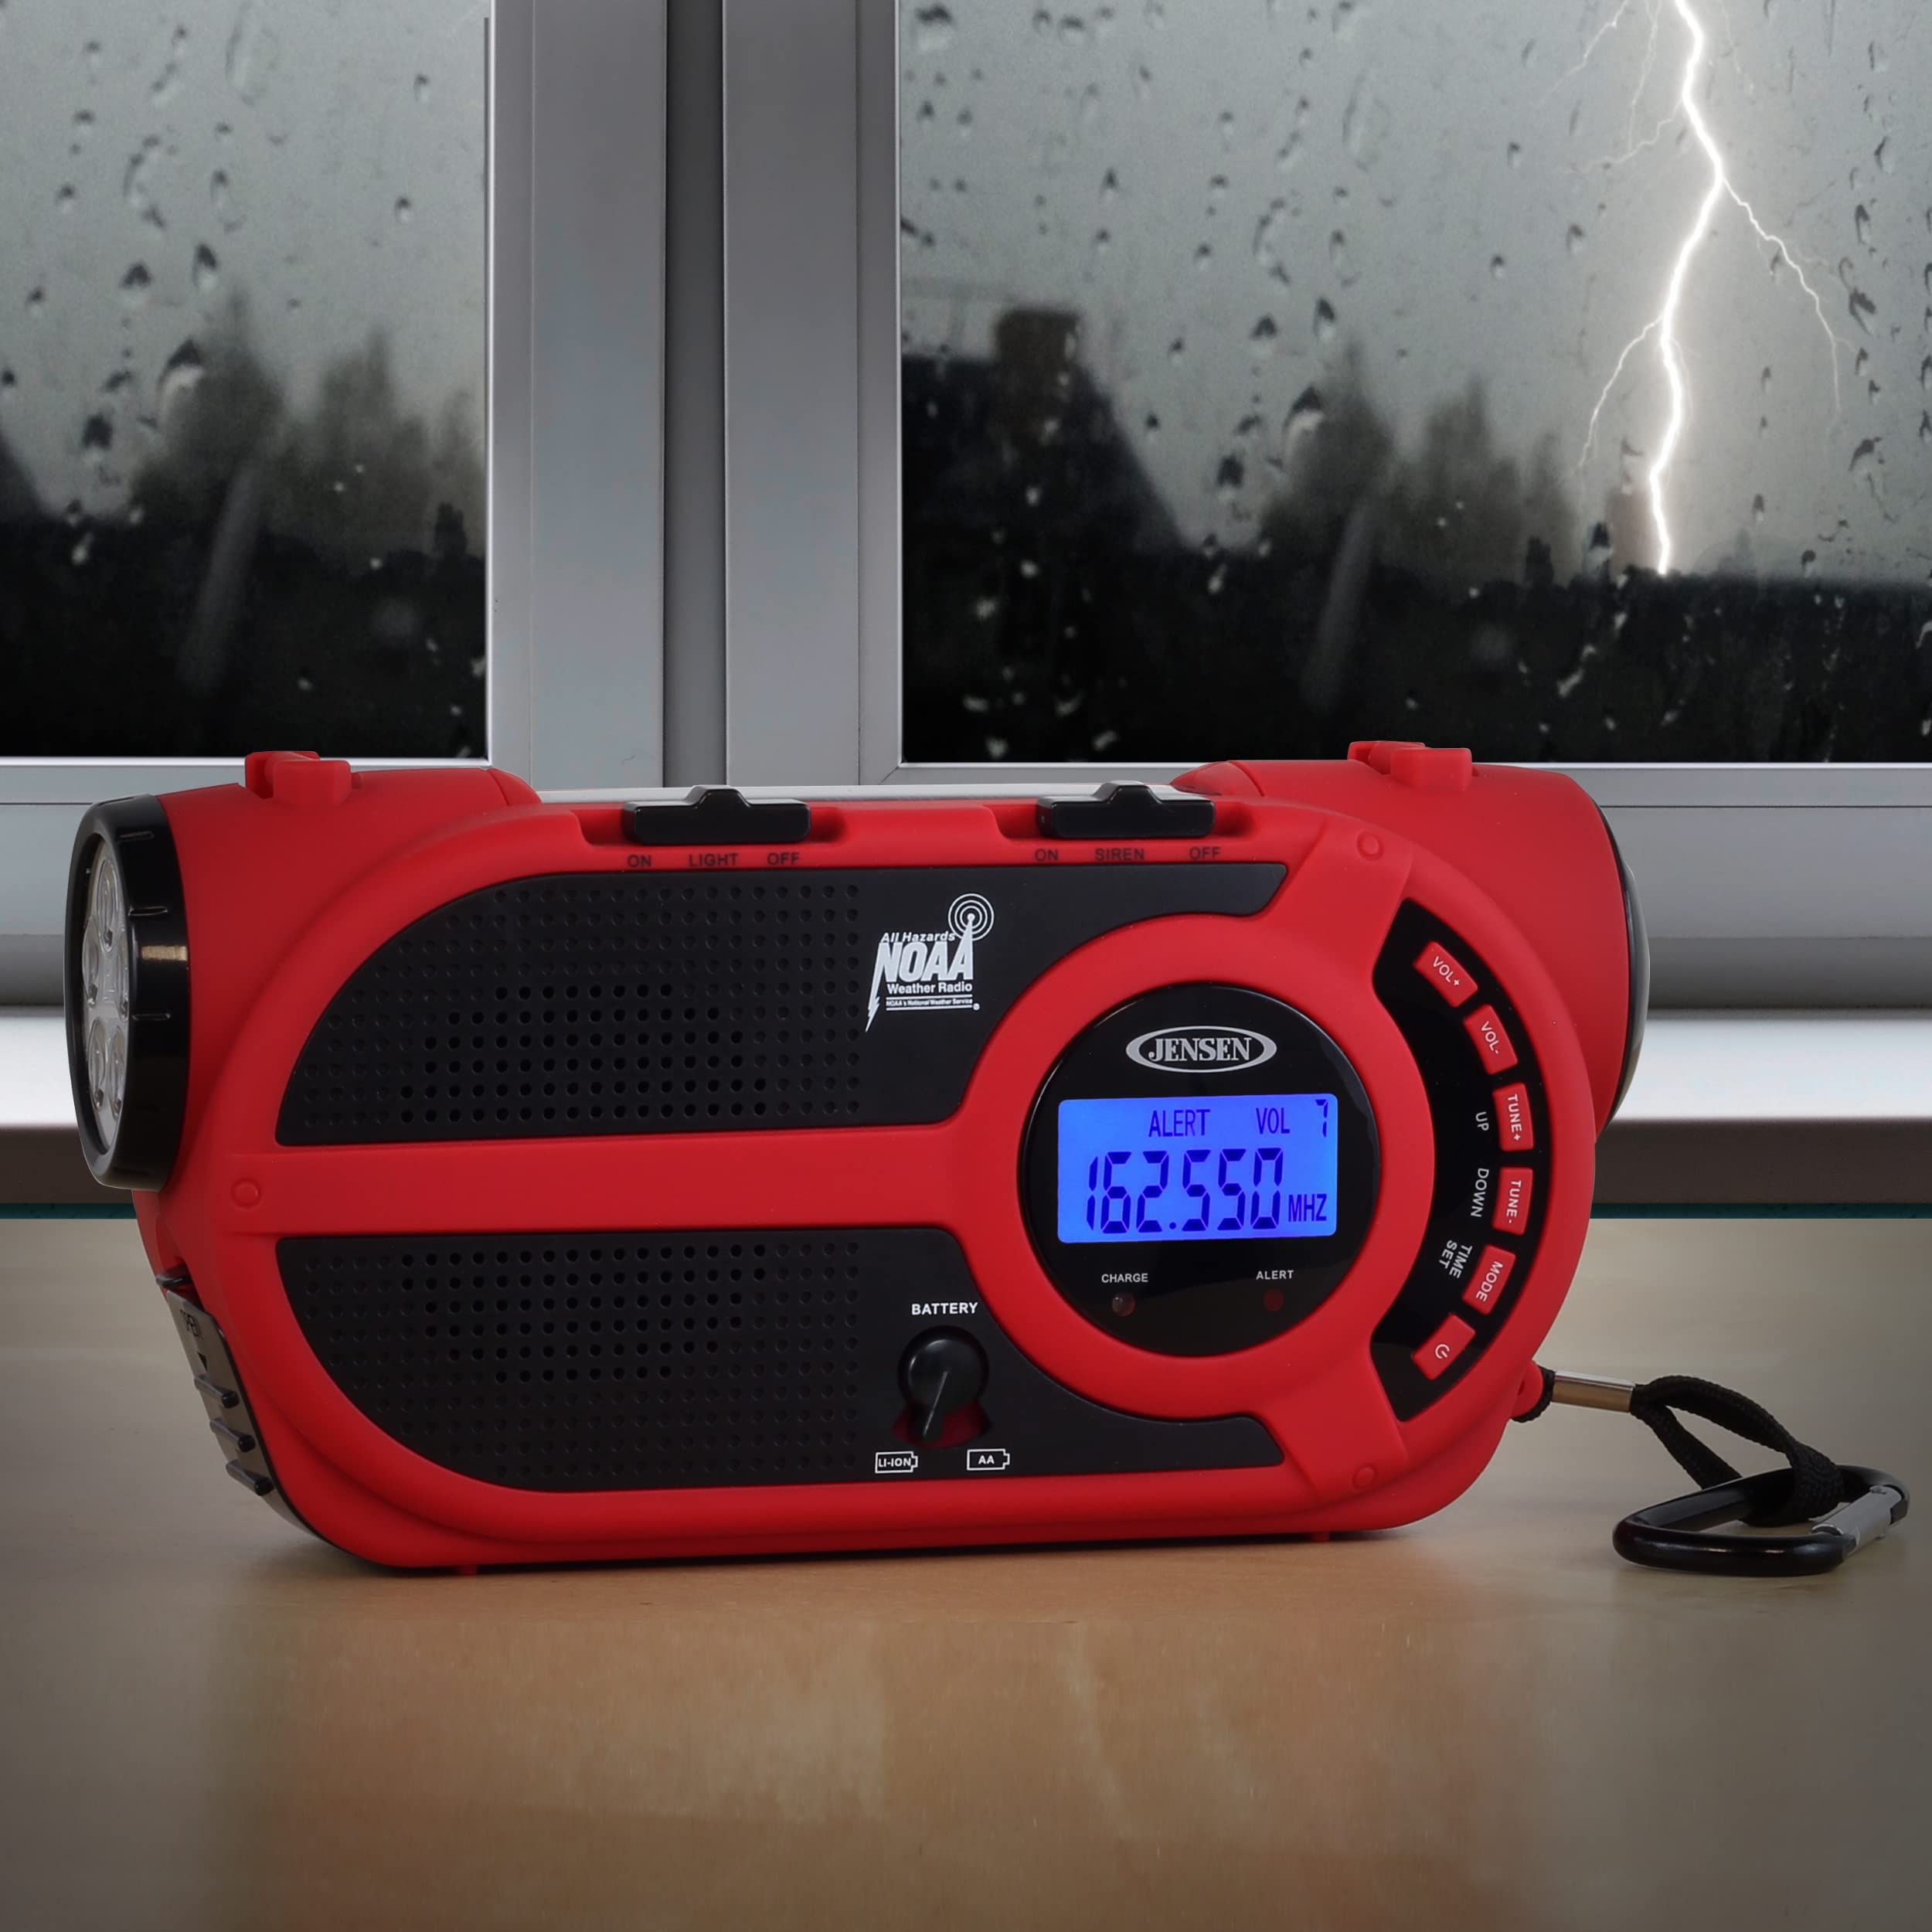 JENSEN JEP-650 AM/FM Weather Band/Weather Alert Radio with 4-Way Power, Built-in Flashlight and Emergency USB Charging